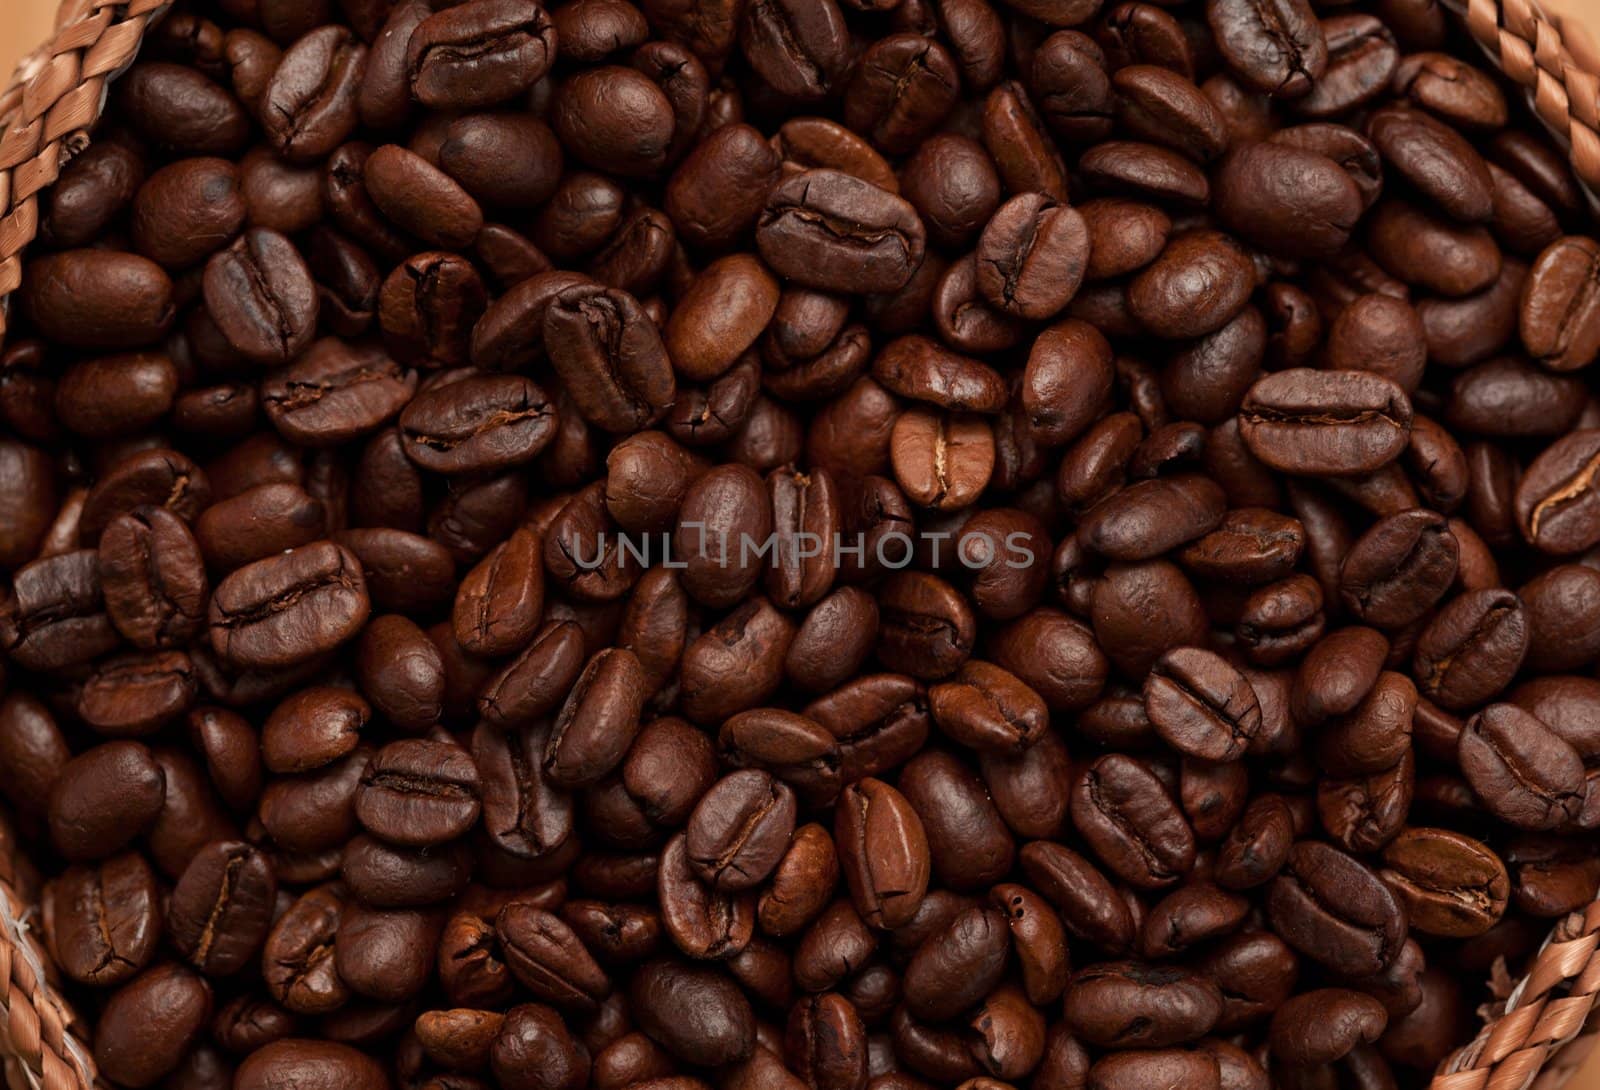 Extreme close up of a basket full of dark coffee beans